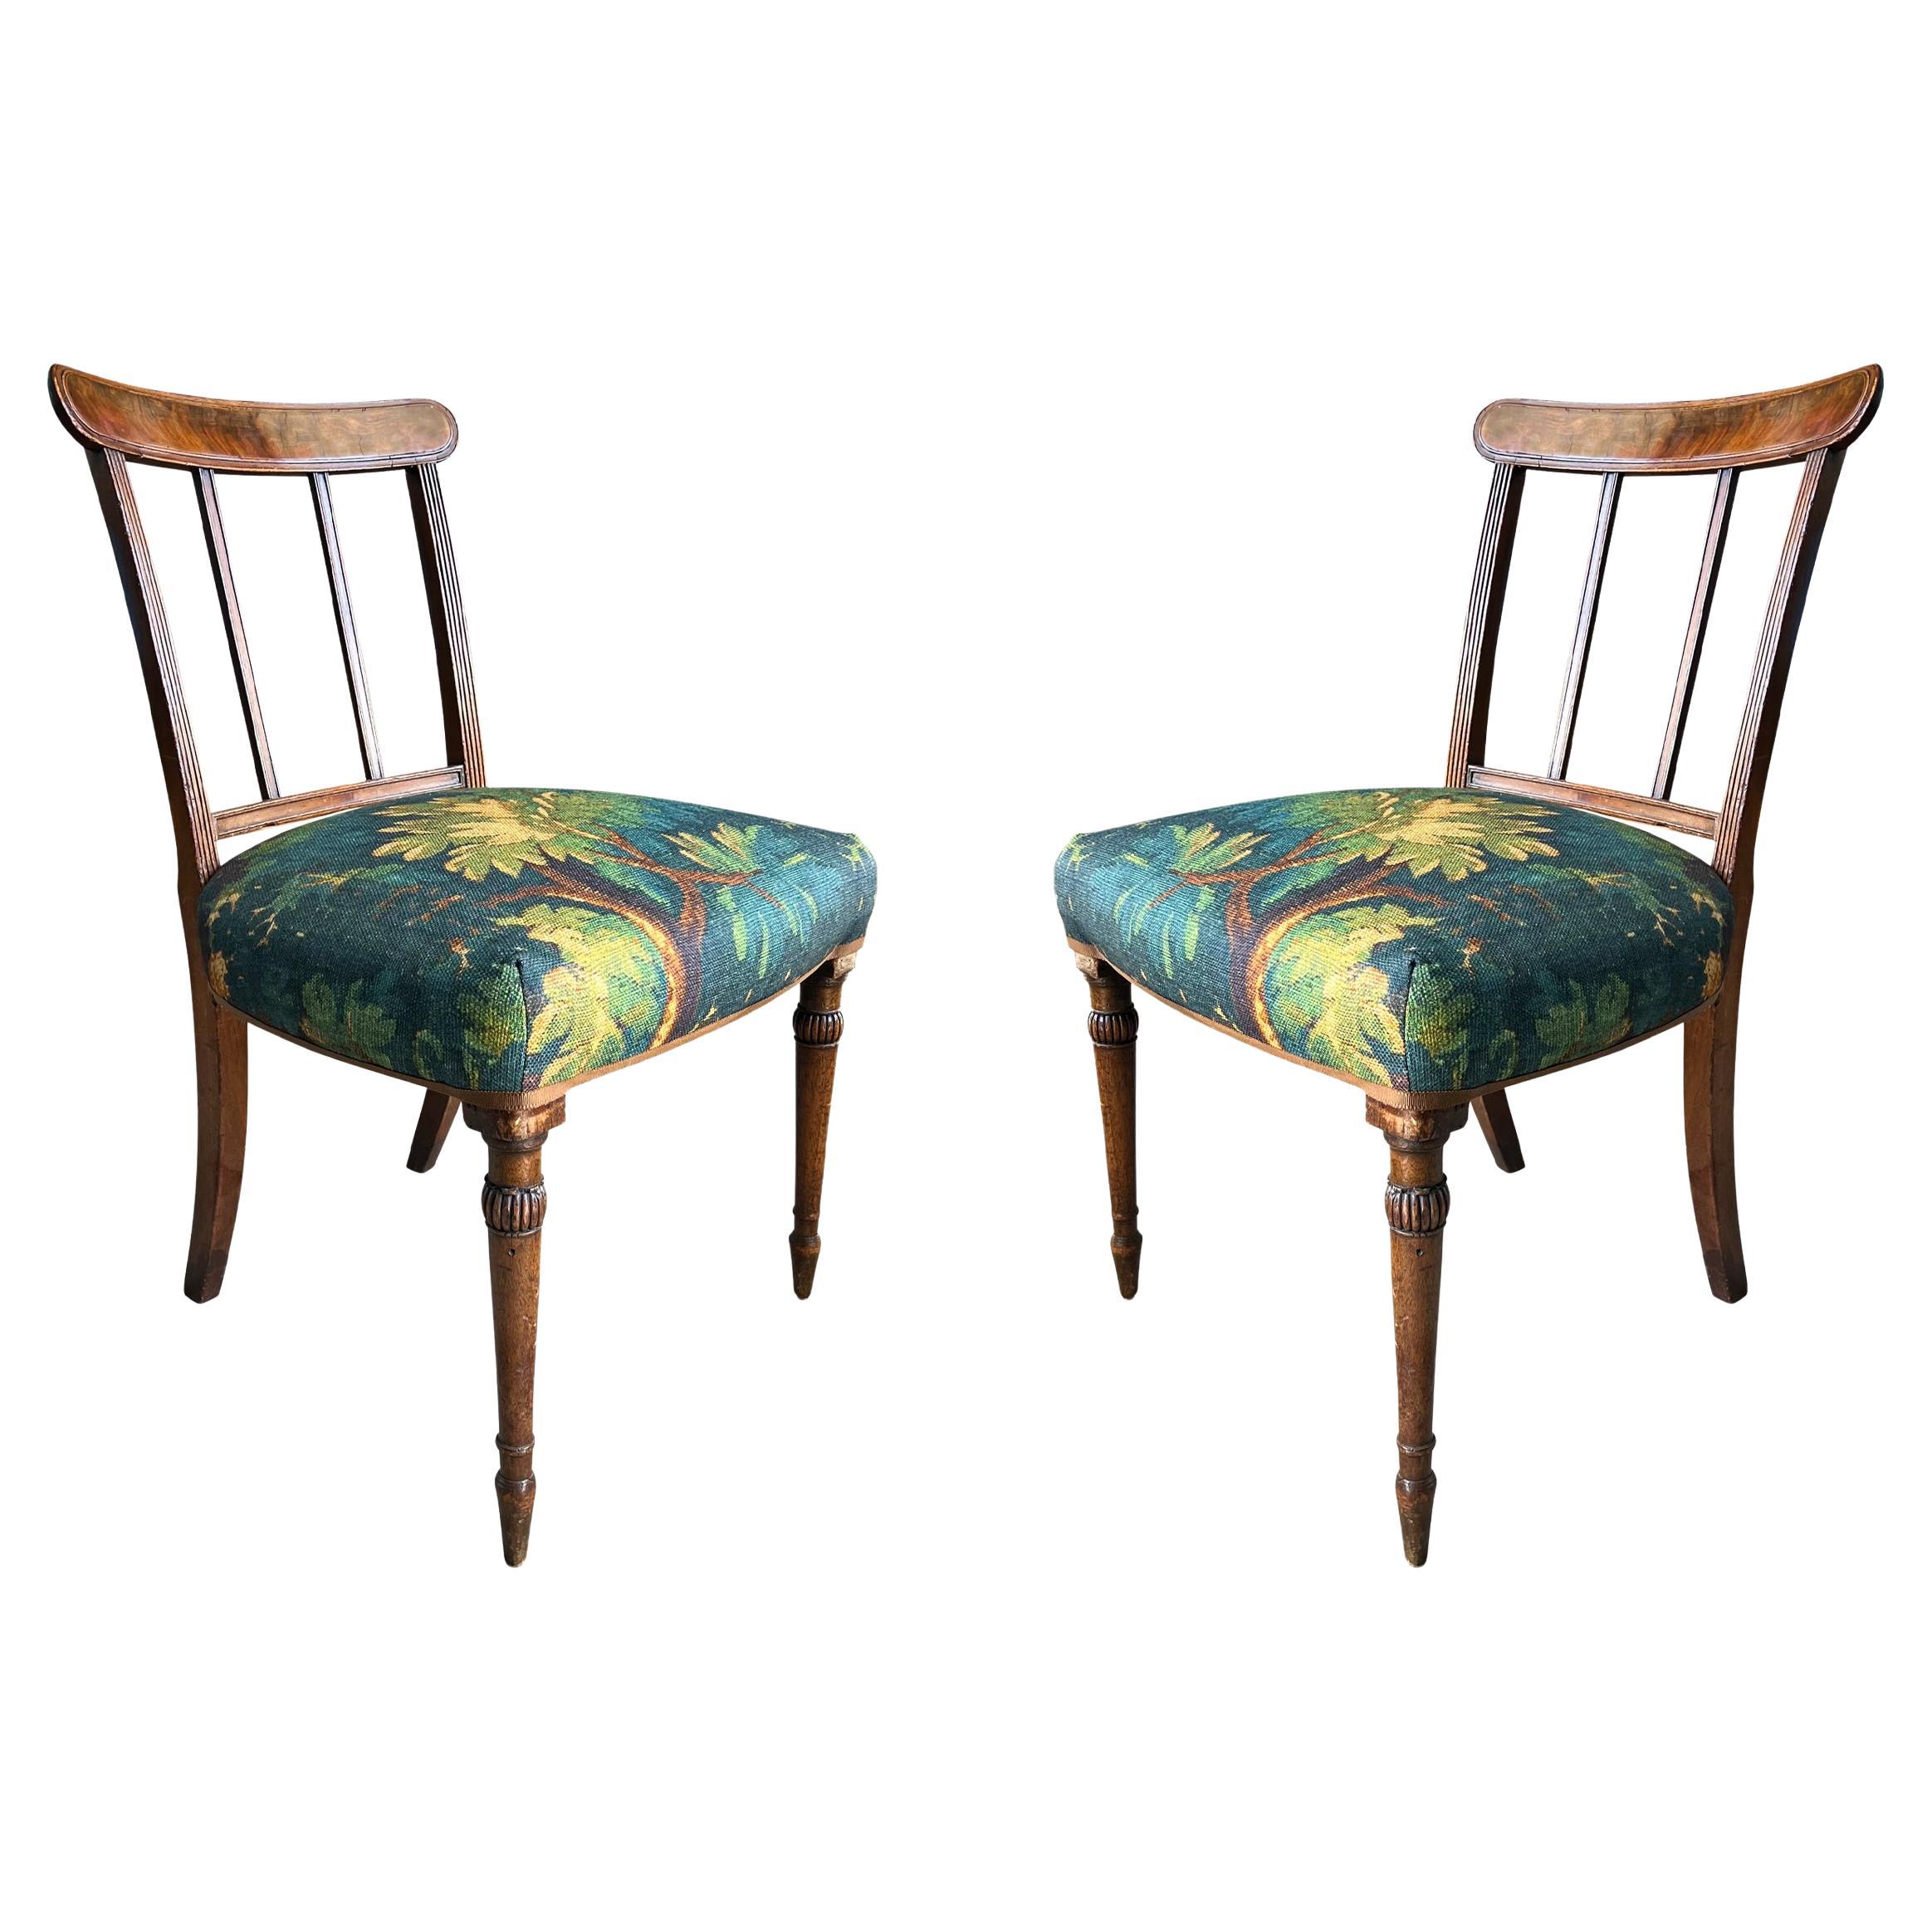 Pair of 19th Century English Regency Side Chairs For Sale